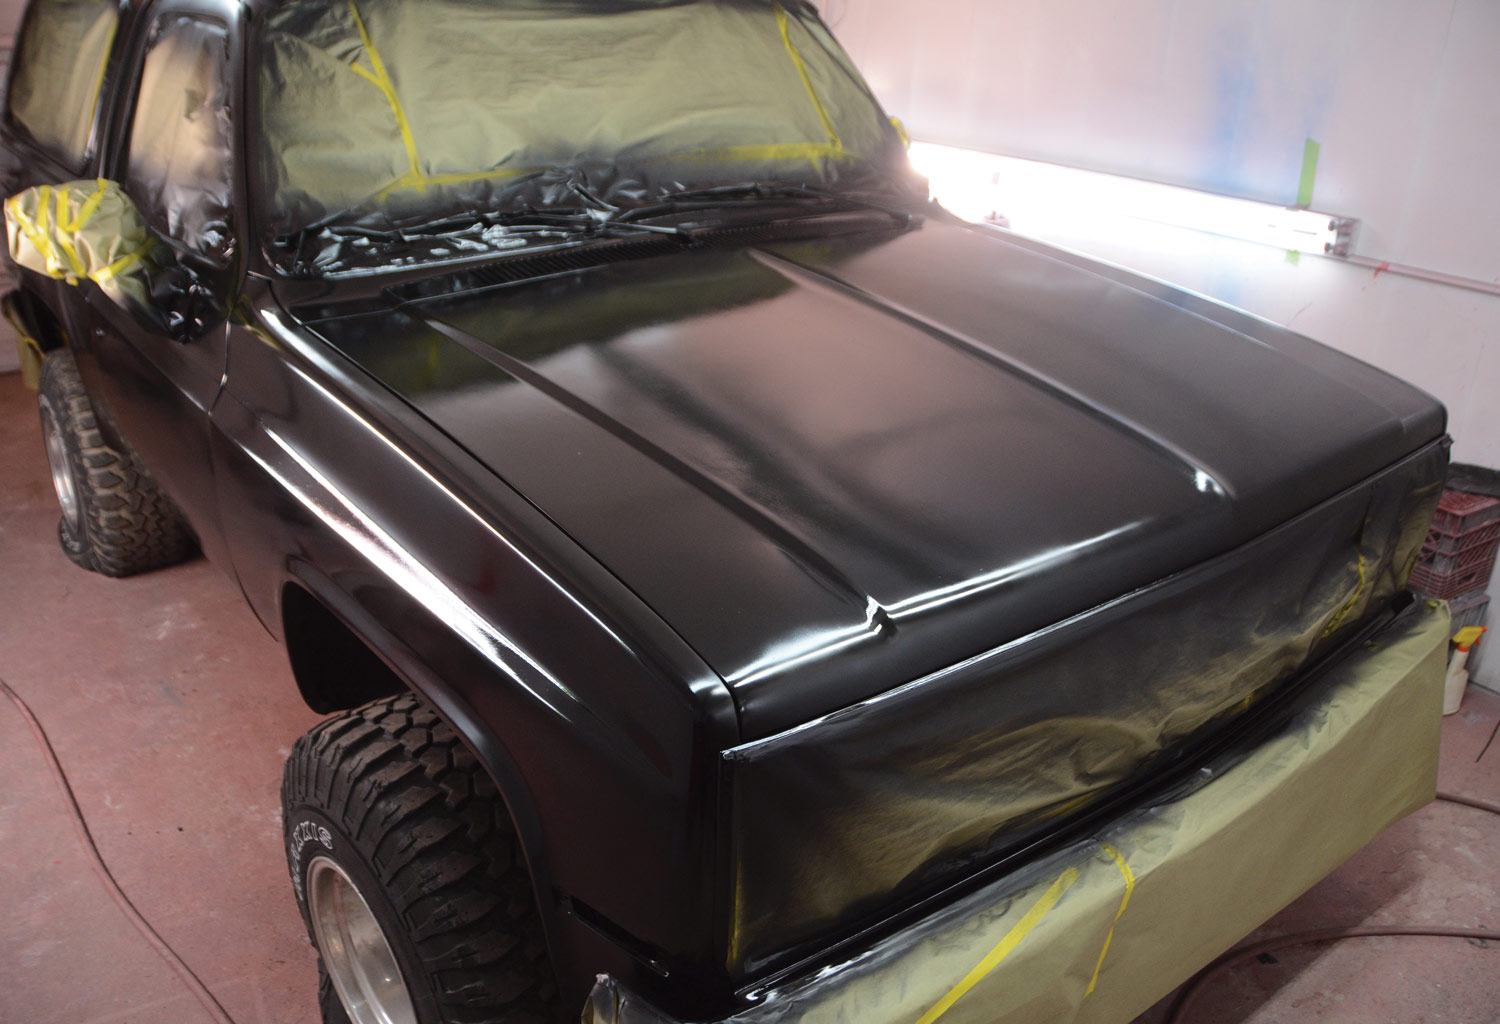 front view of the Blazer with one coat of flat black paint